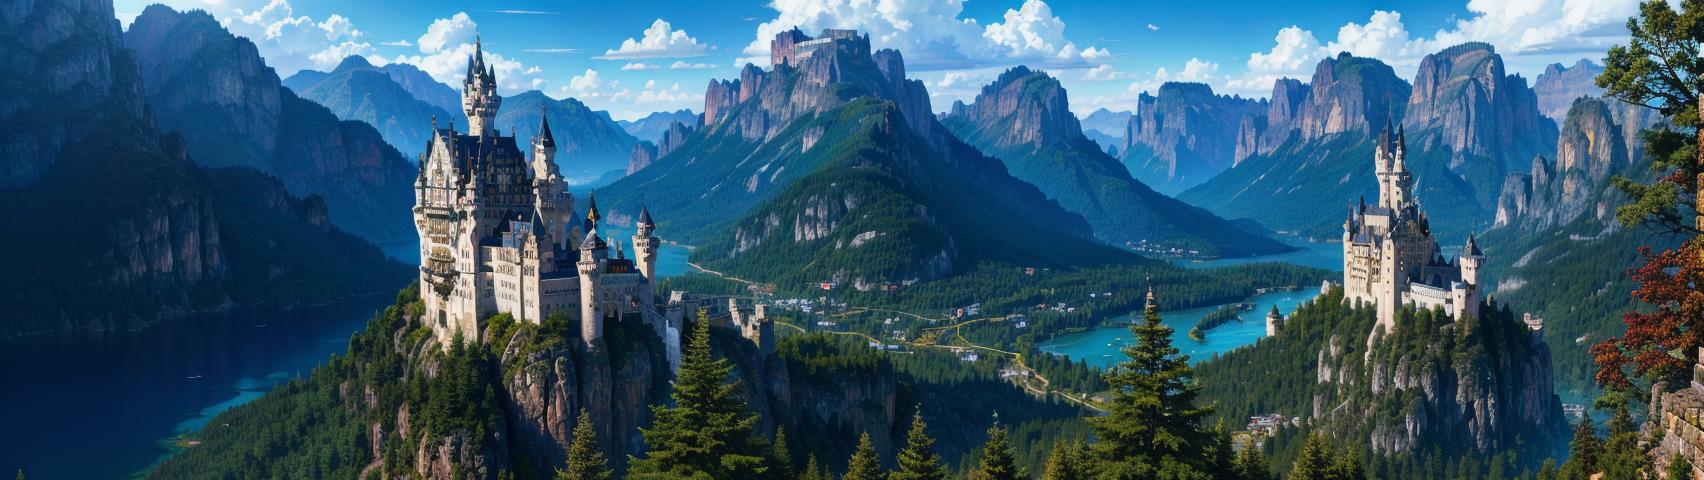 A mountain castle overlooking a waterfall and town.